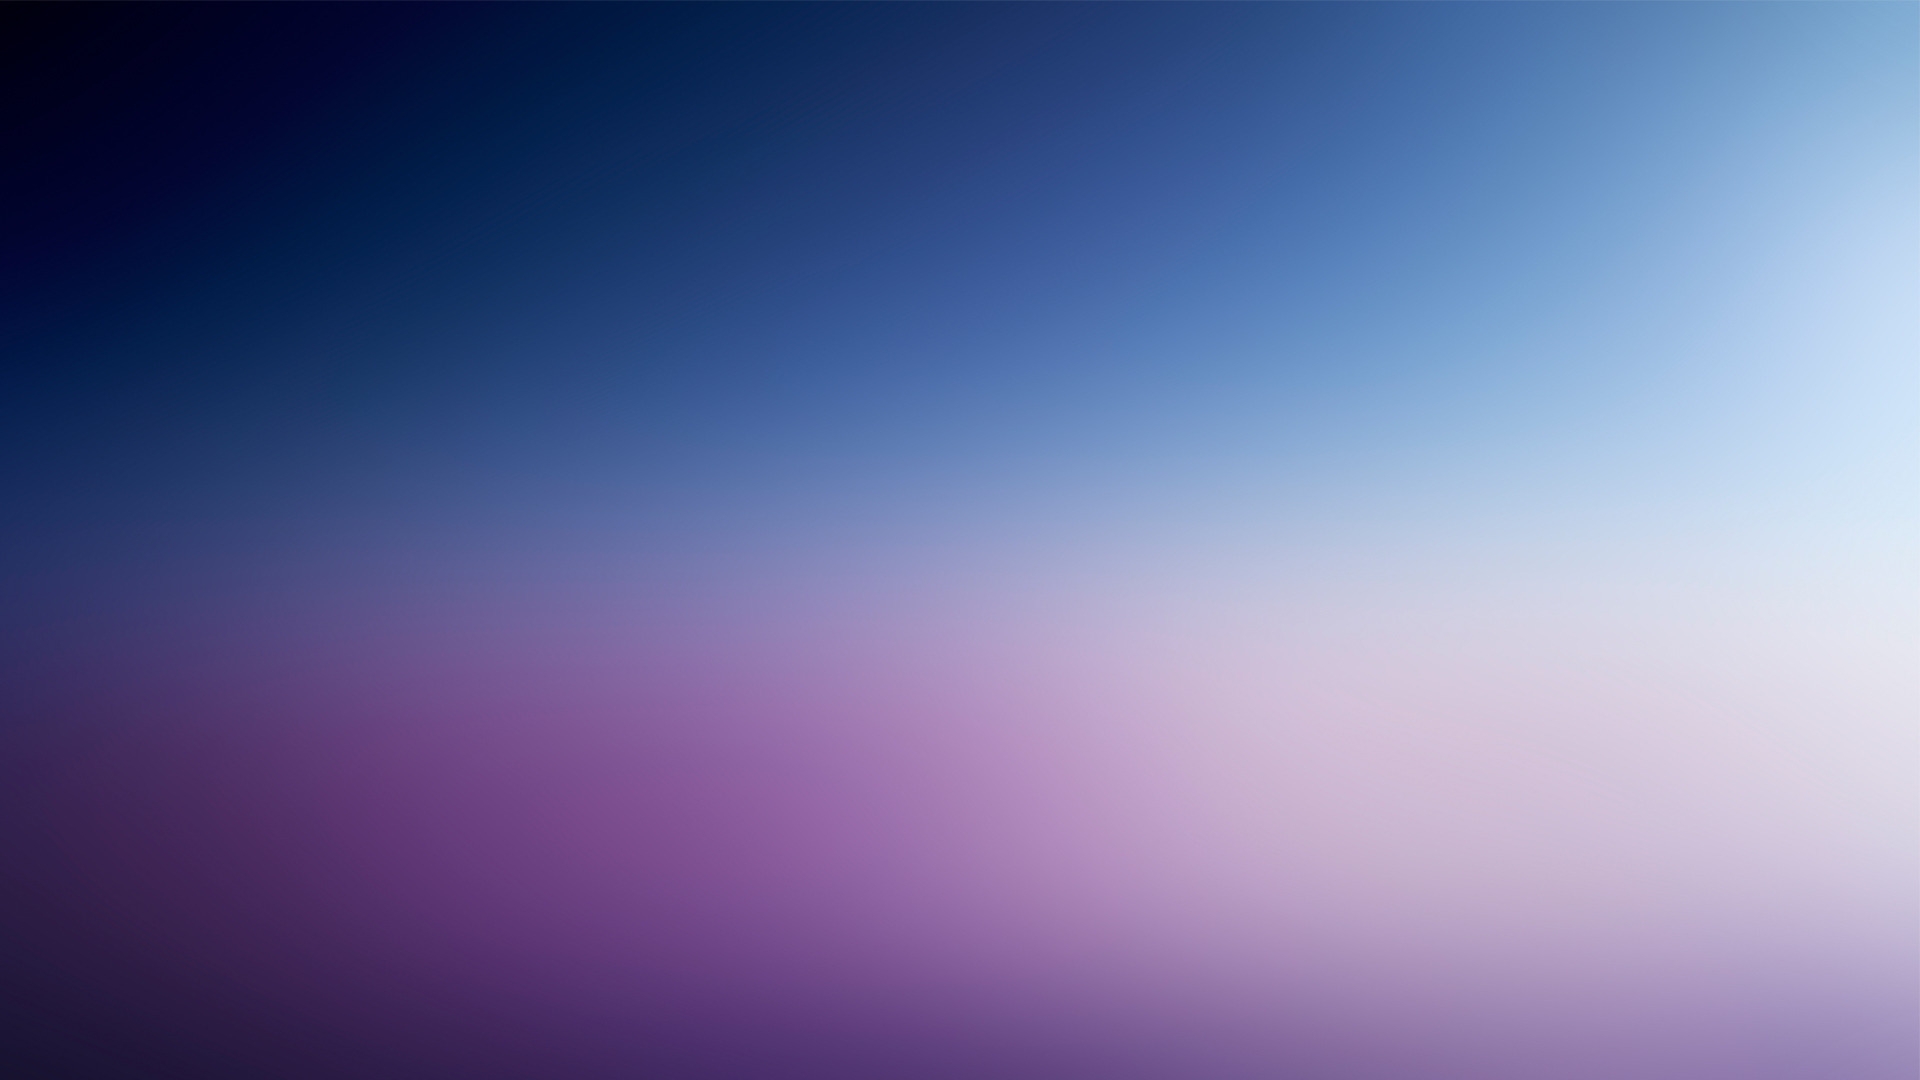 Background Wallpaper HD 1080p Hqfx For